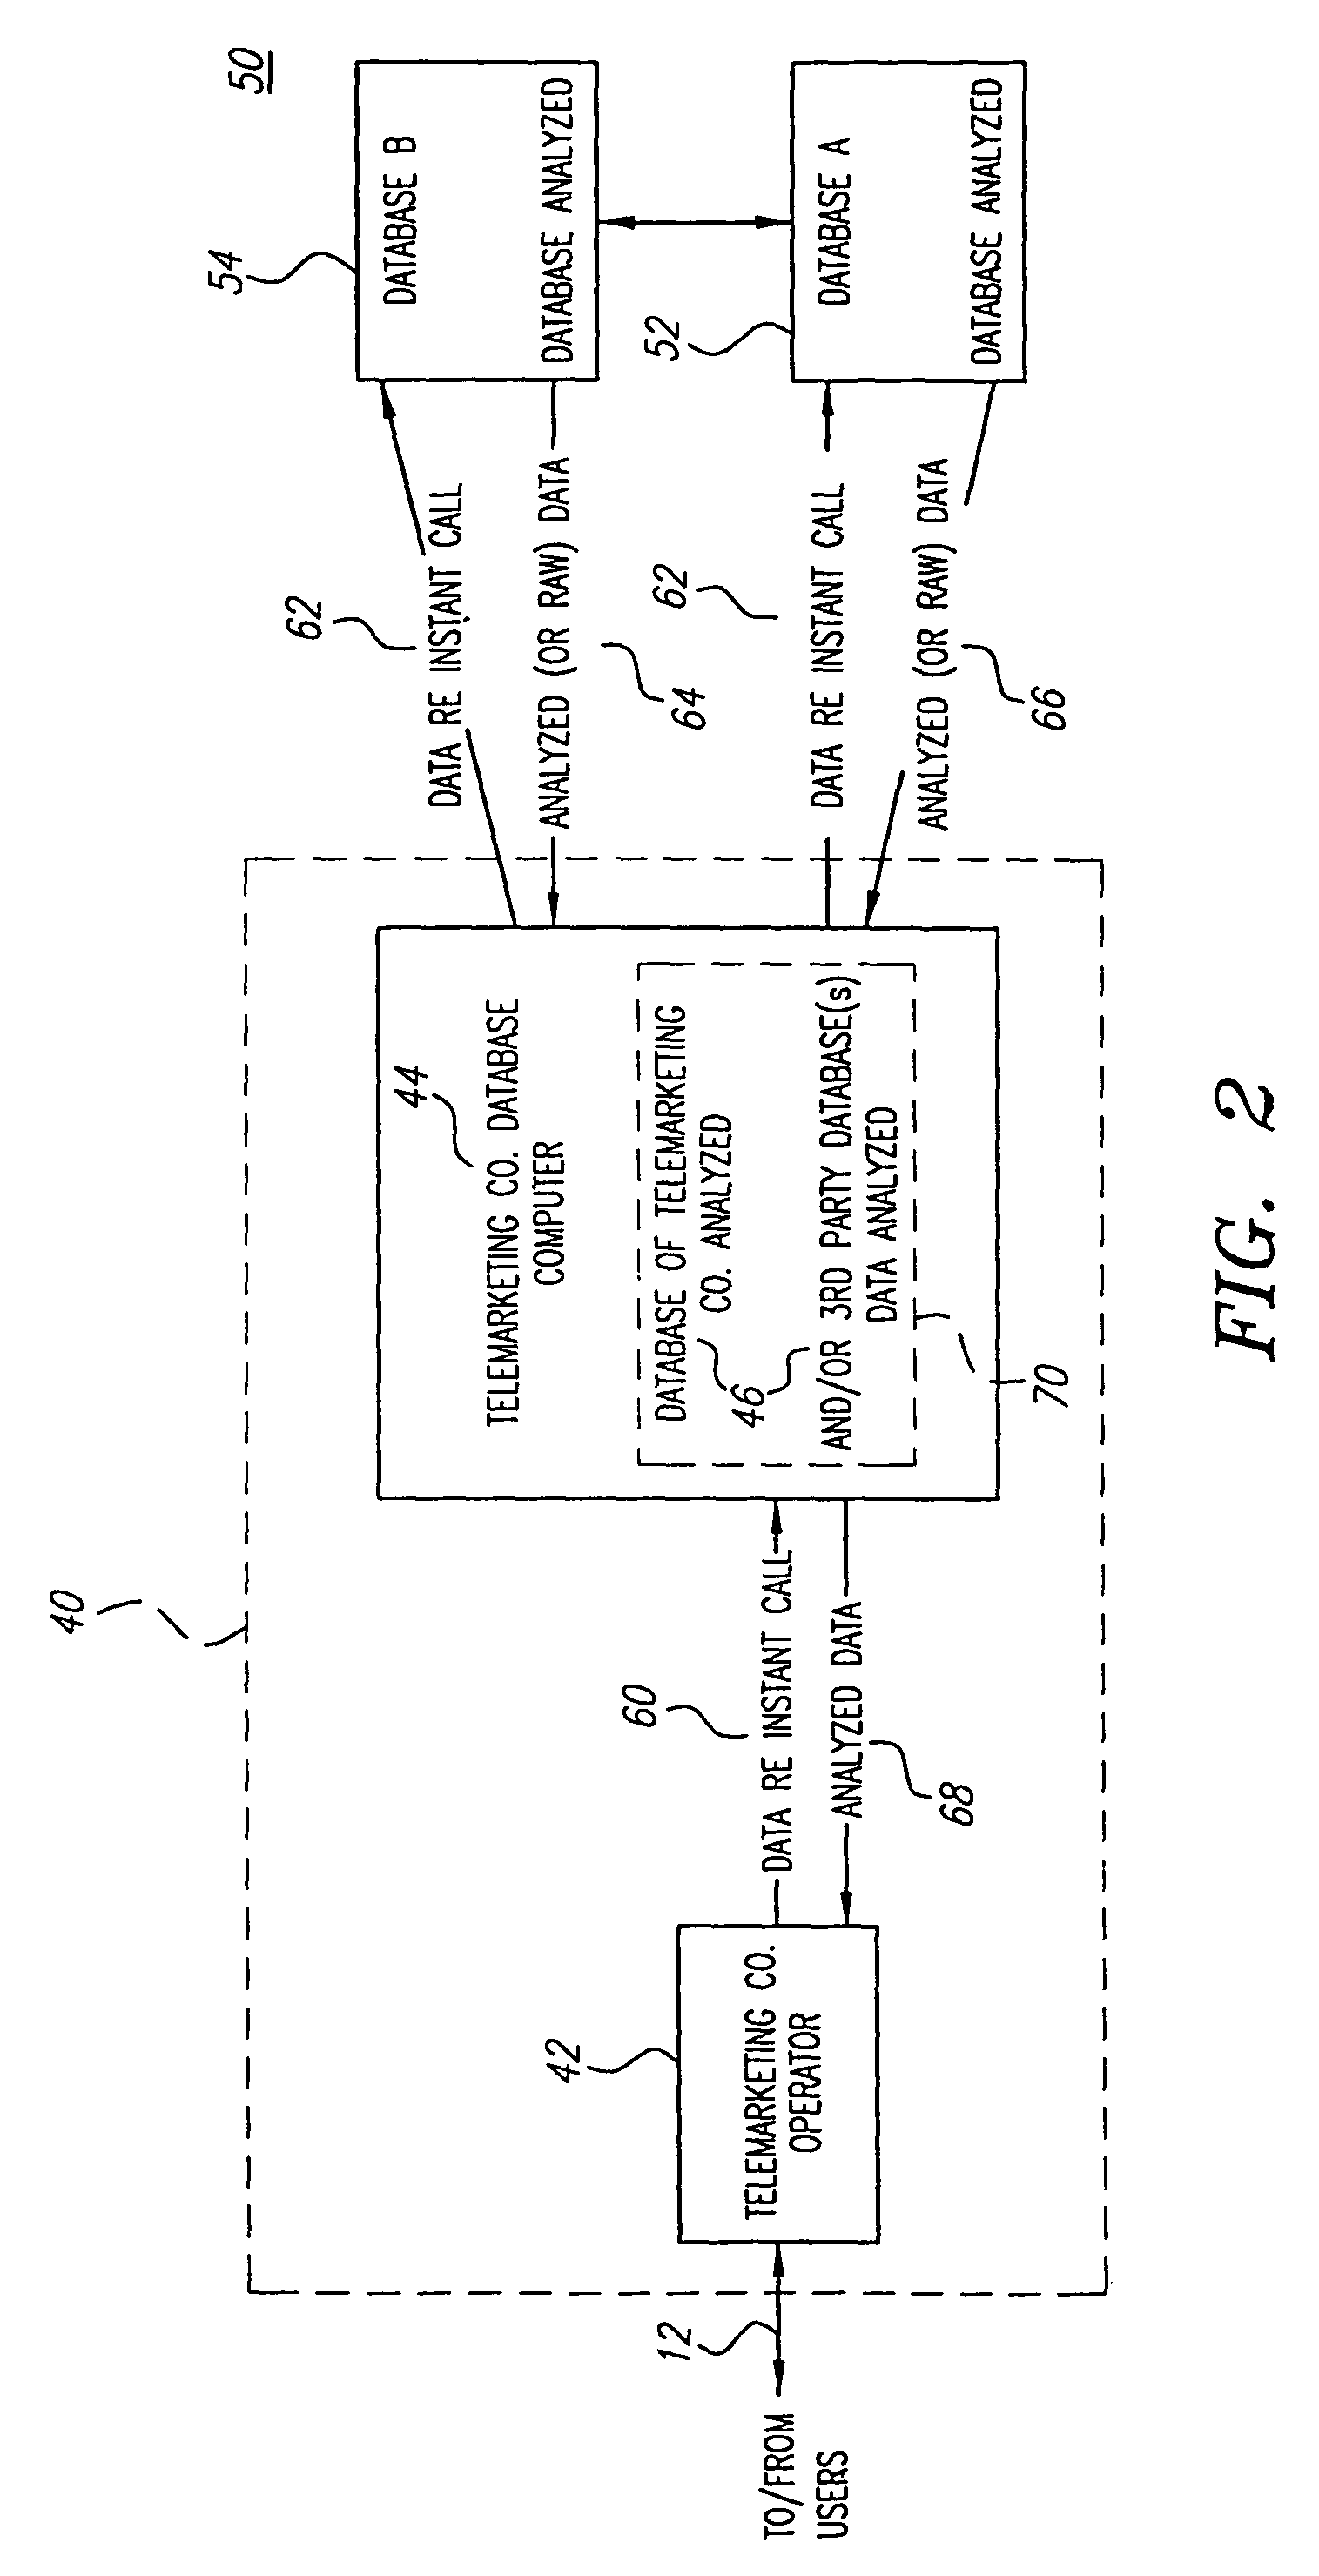 Systems and methods that use geographic data to intelligently select goods and services to offer in telephonic and electronic commerce